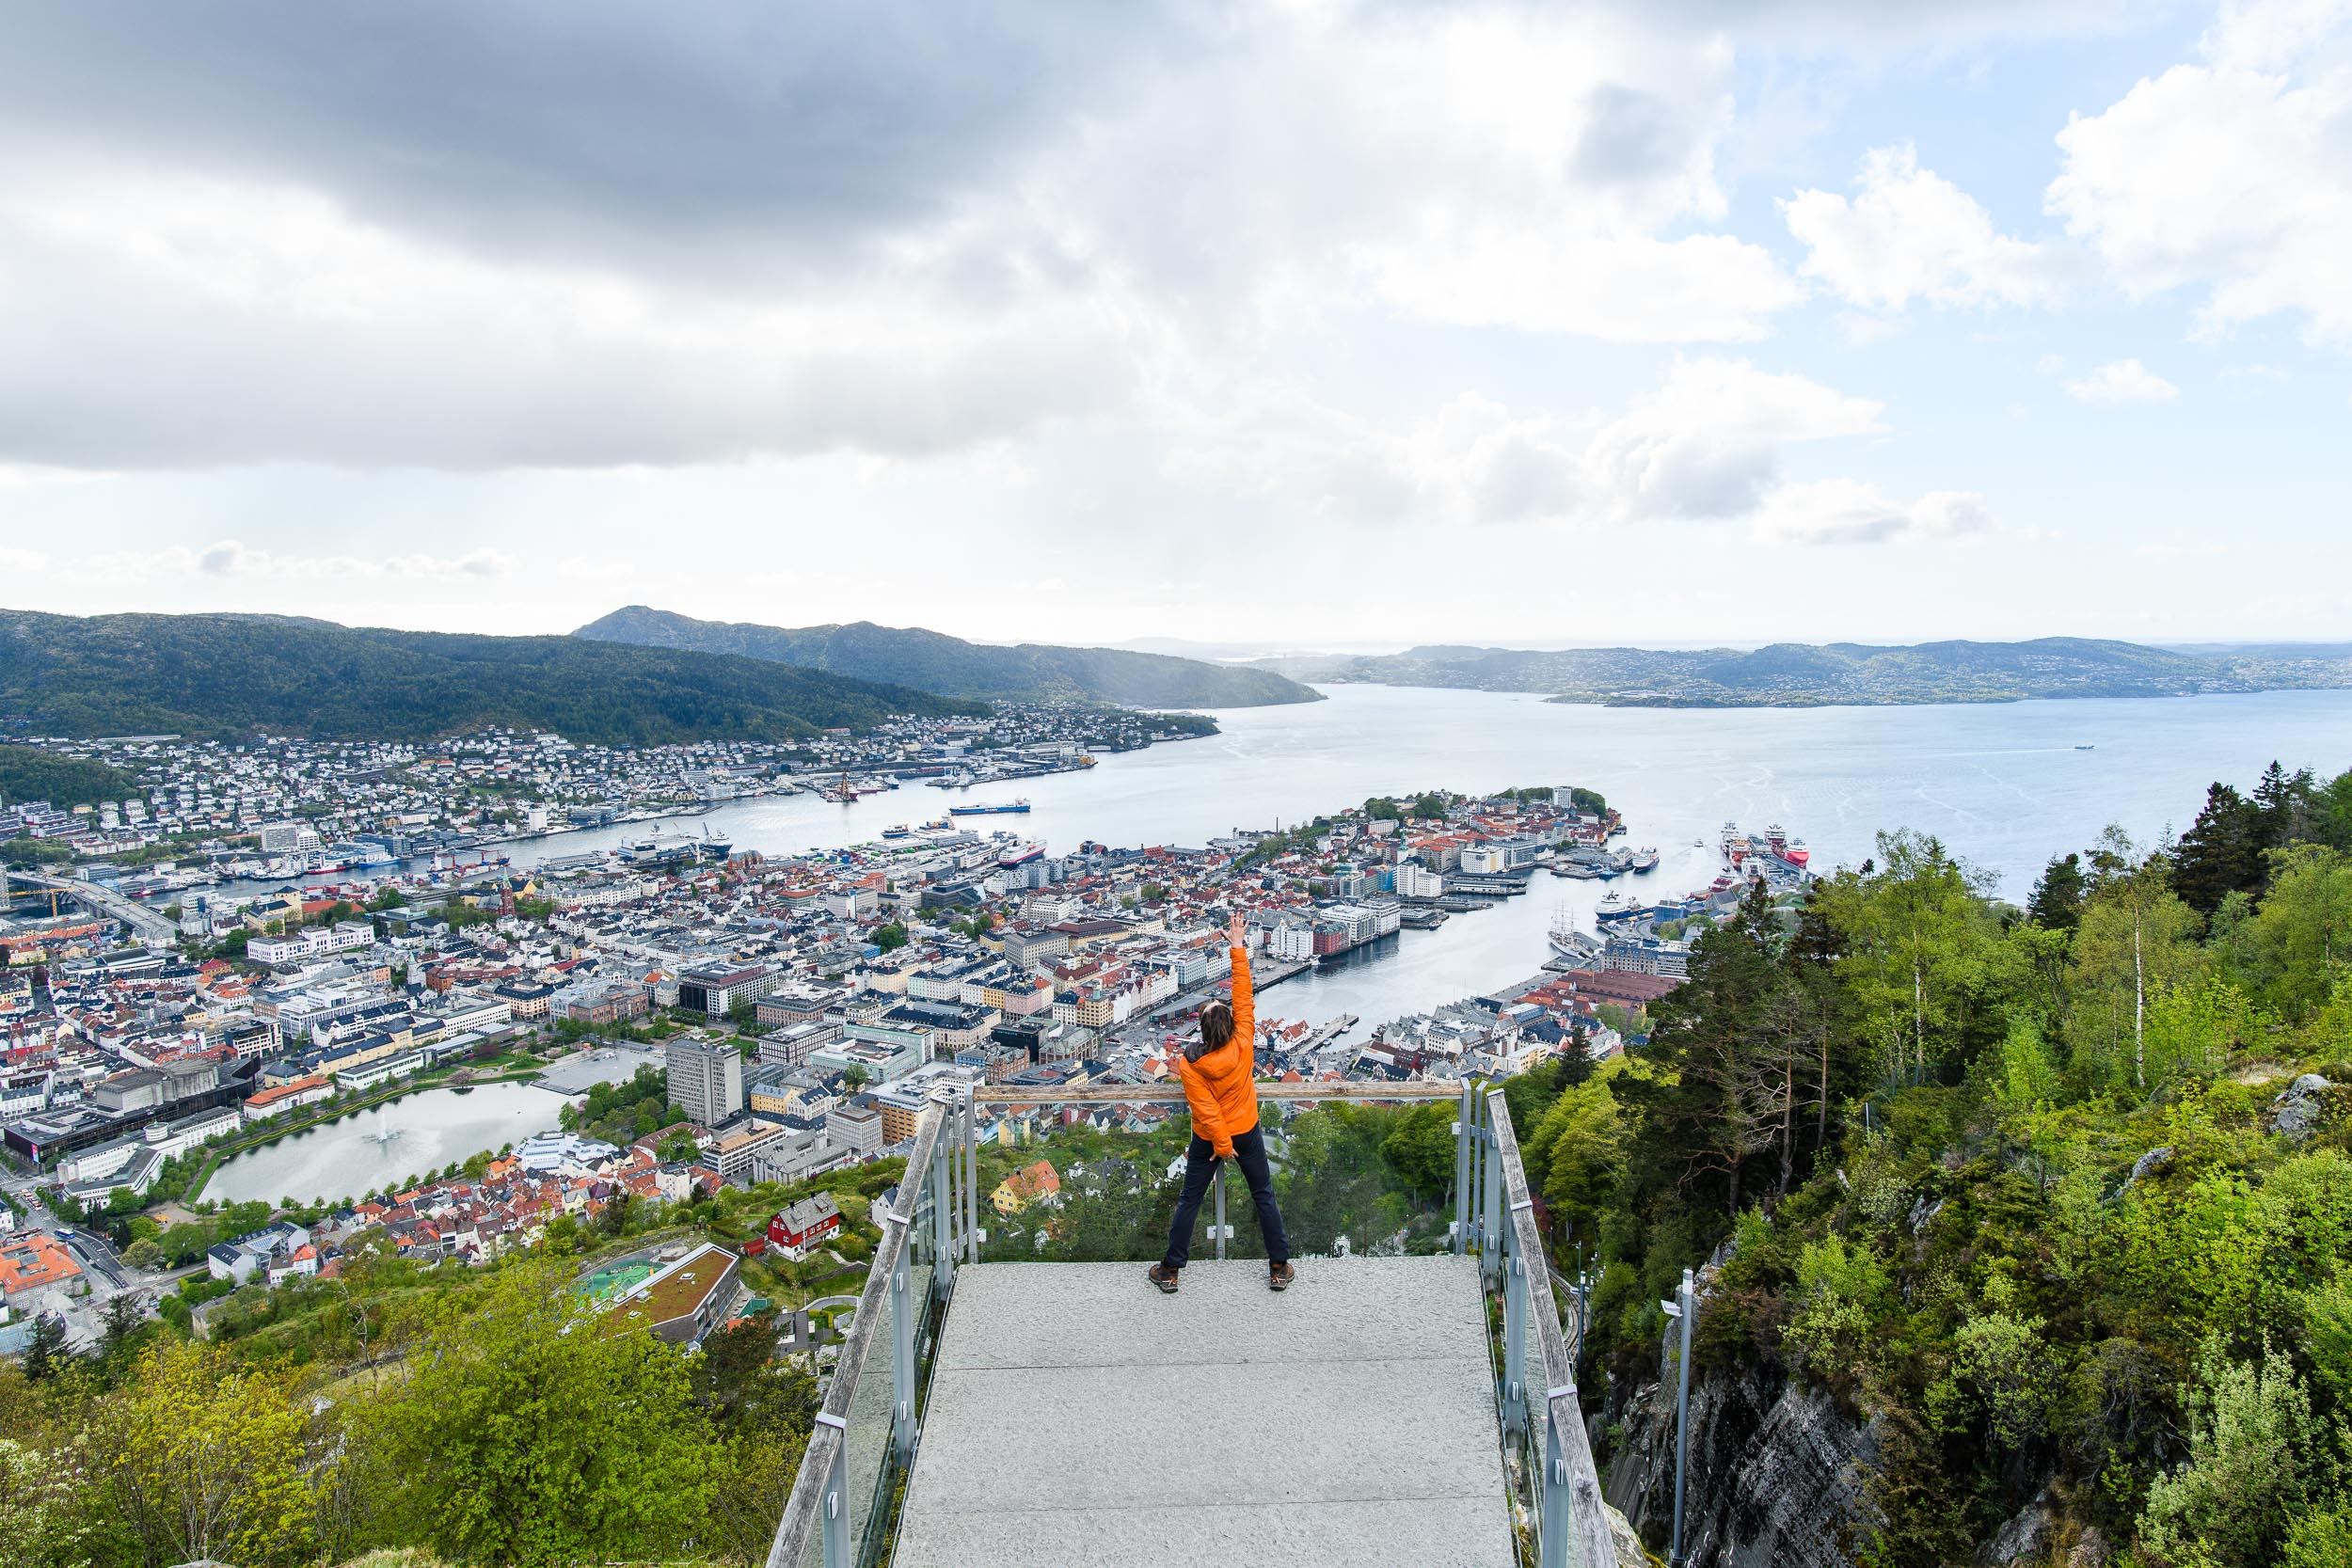 View from Mount Fløyen, overlooking Bergen, Norway. A victorious pose after skipping the floibanen to hike up the hill.